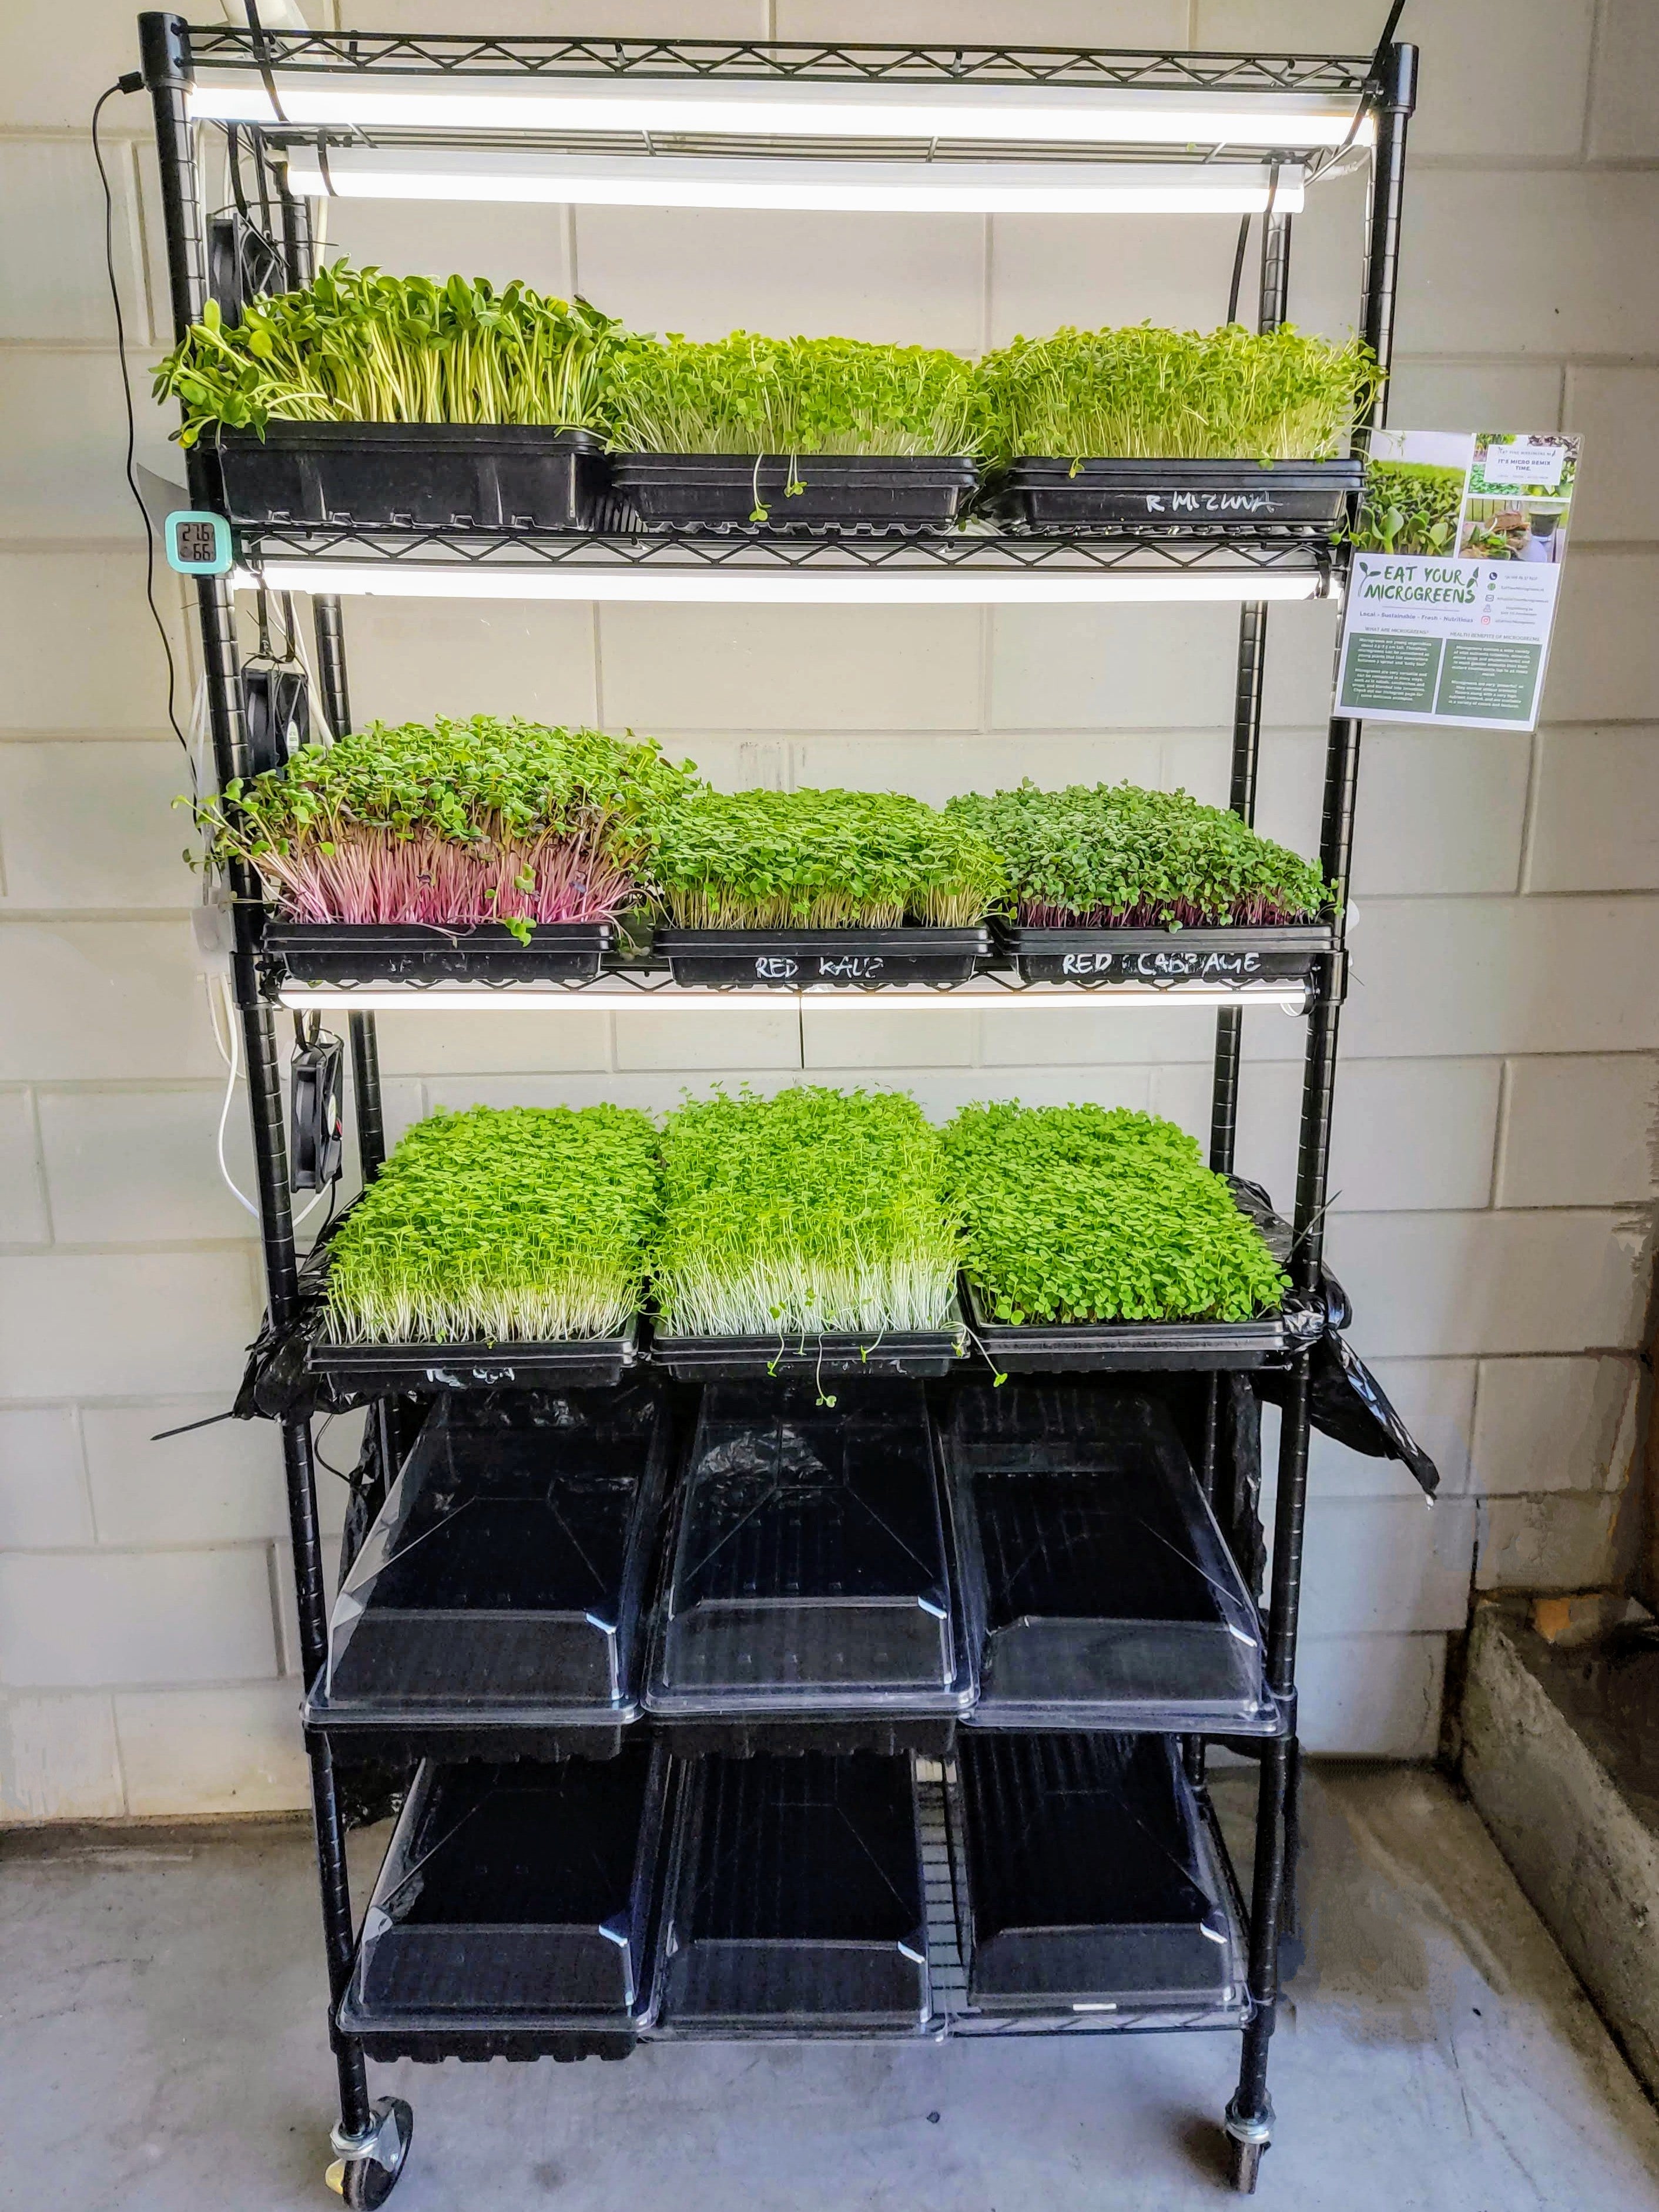 Microgreen Integrated Farm - Grow over 10kgs food -  Empower yourself, family, and community